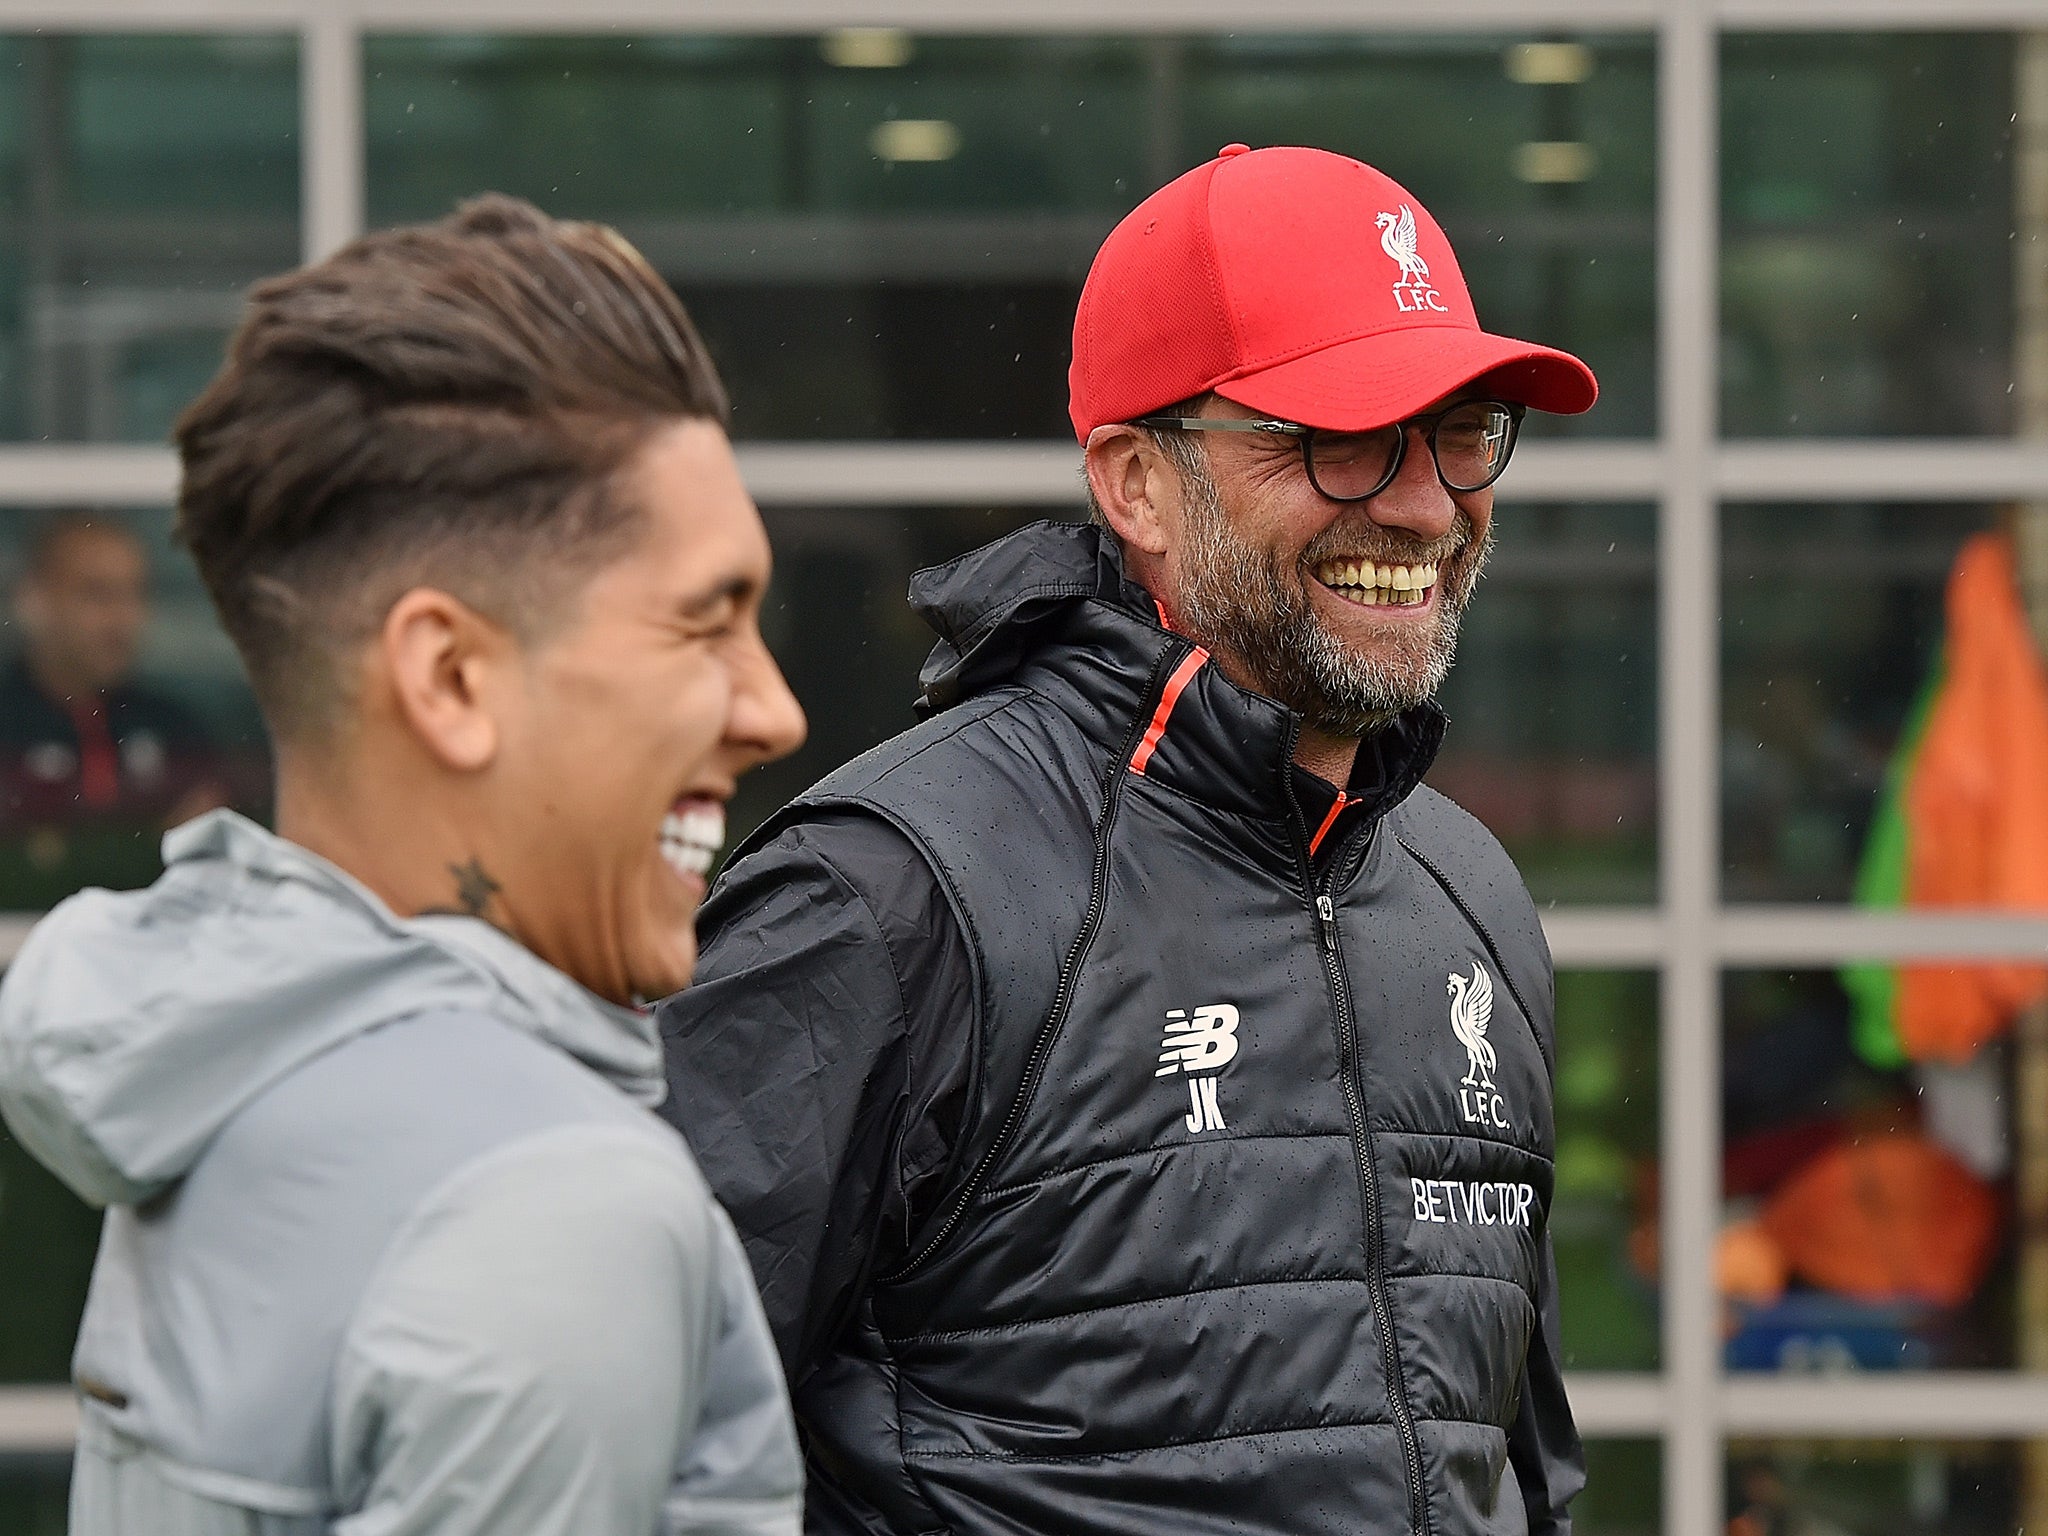 Liverpool's plans do not rest solely on Champions League qualification, according to Jurgen Klopp